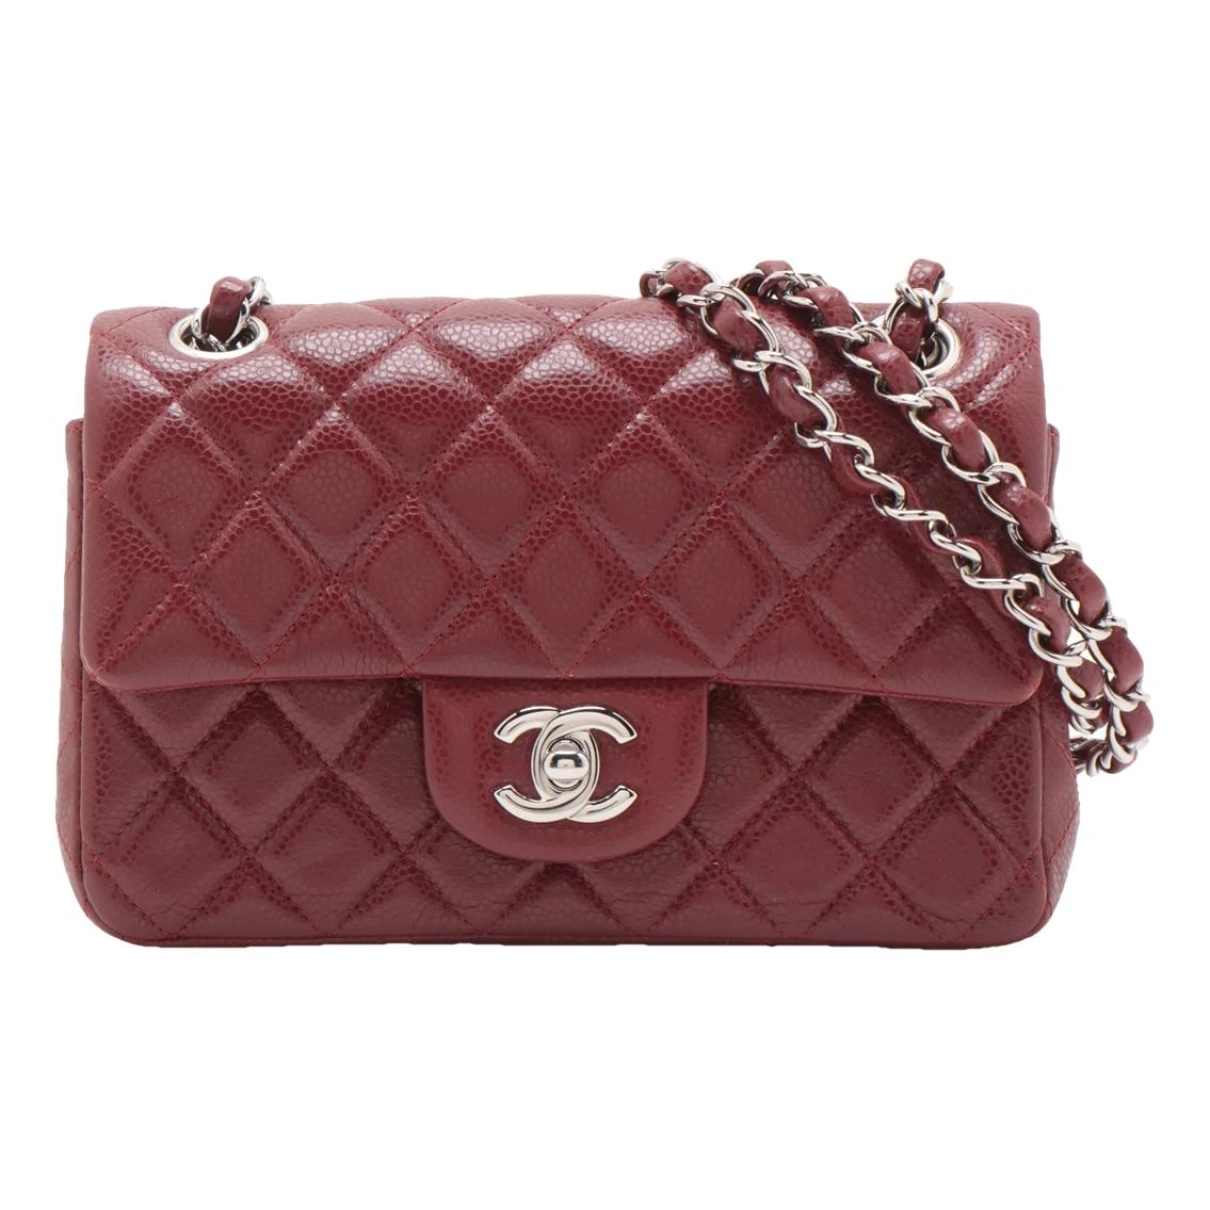 Pre-owned Chanel Timeless/classique Leather Crossbody Bag In Burgundy